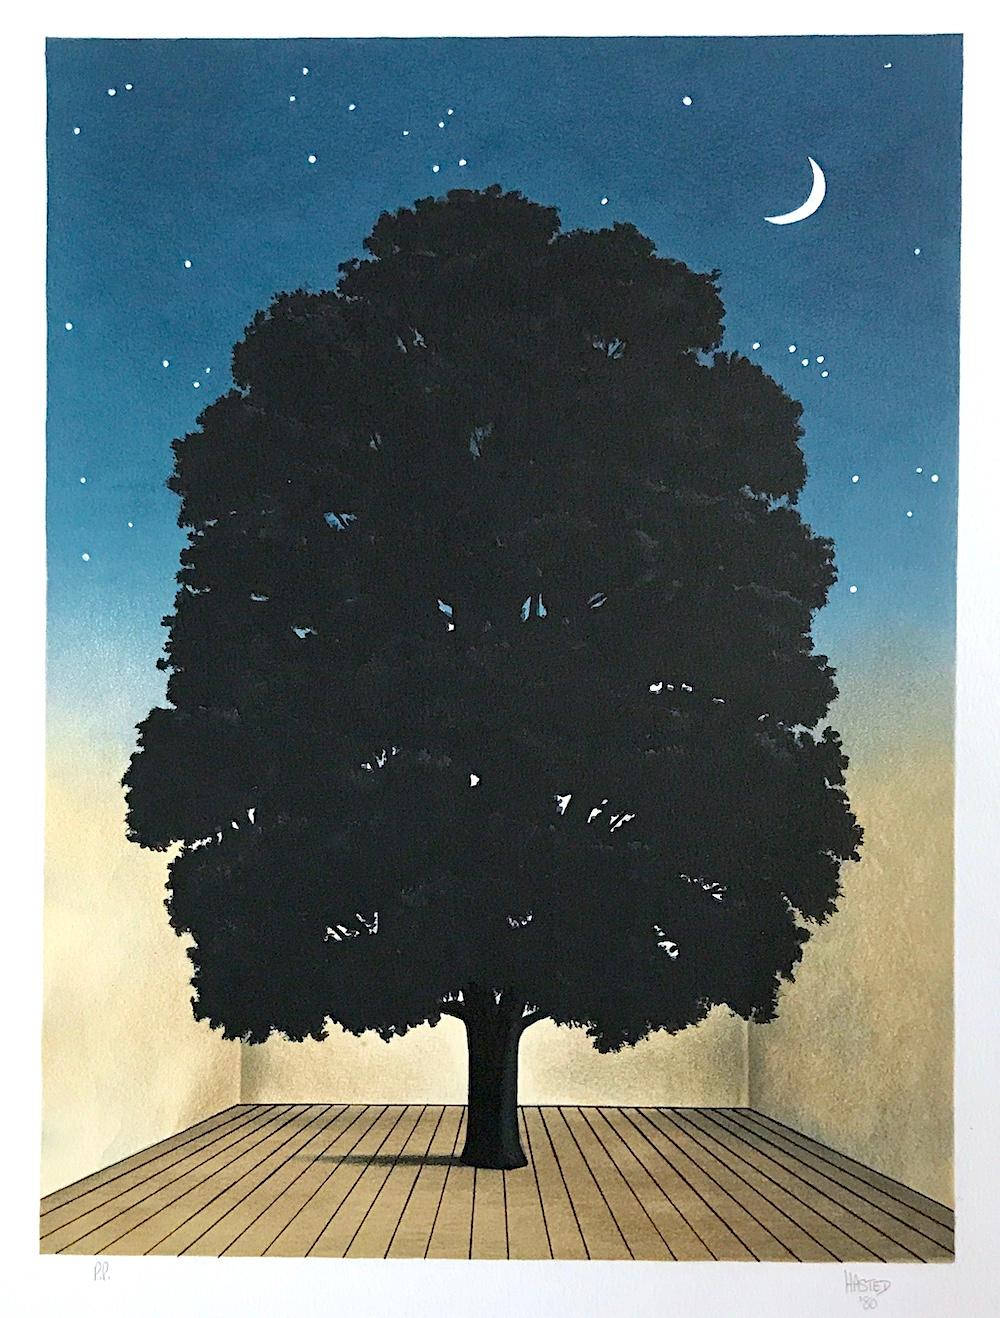 Michael Hasted Landscape Print - SONG OF PRAISE Hand Drawn Lithograph, Tree Portrait, Night Sky, Crescent Moon